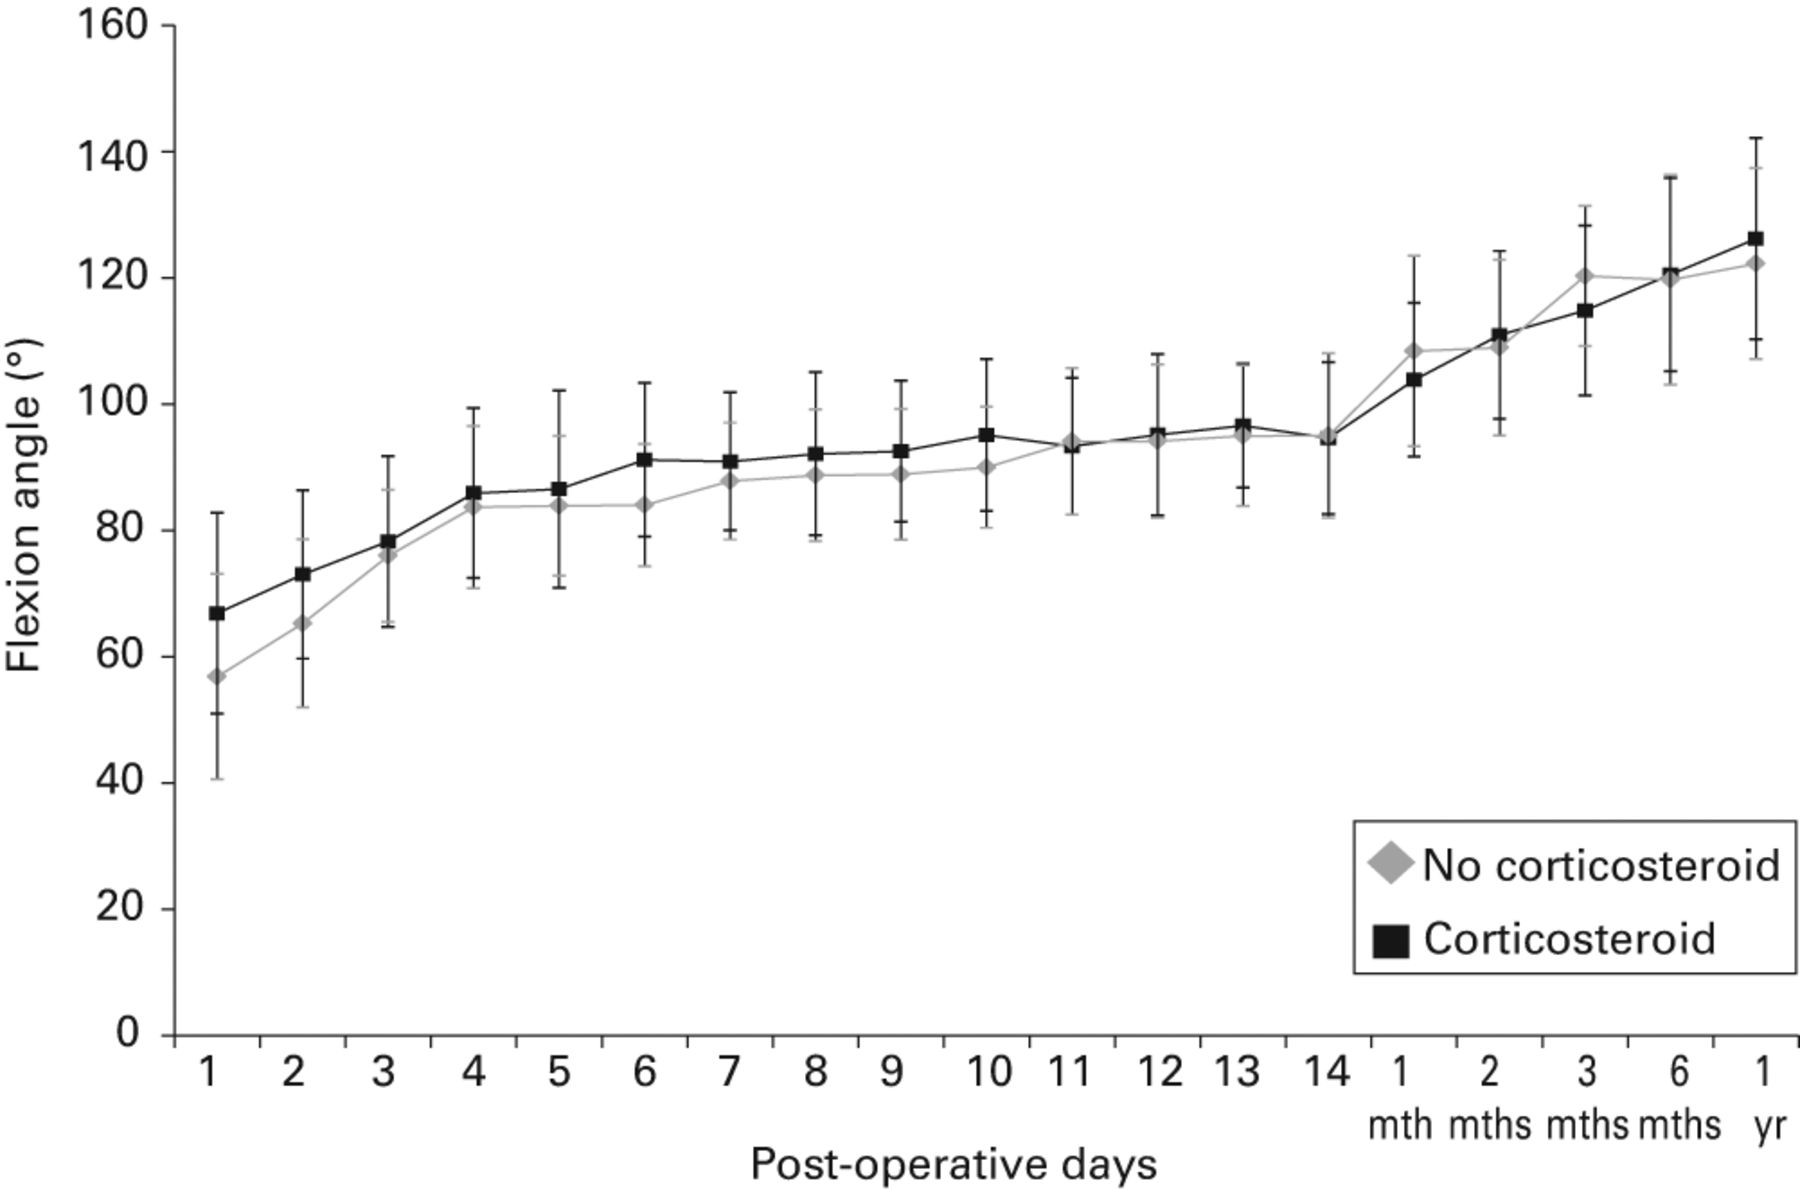 Fig. 3 
            Graph showing the mean flexion angle
of the knee (with standard deviation) after total knee arthroplasty.
The corticosteroid group had a significantly better mean flexion
angle on post-operative days one and two (p = 0.014 and p = 0.017, respectively).
          